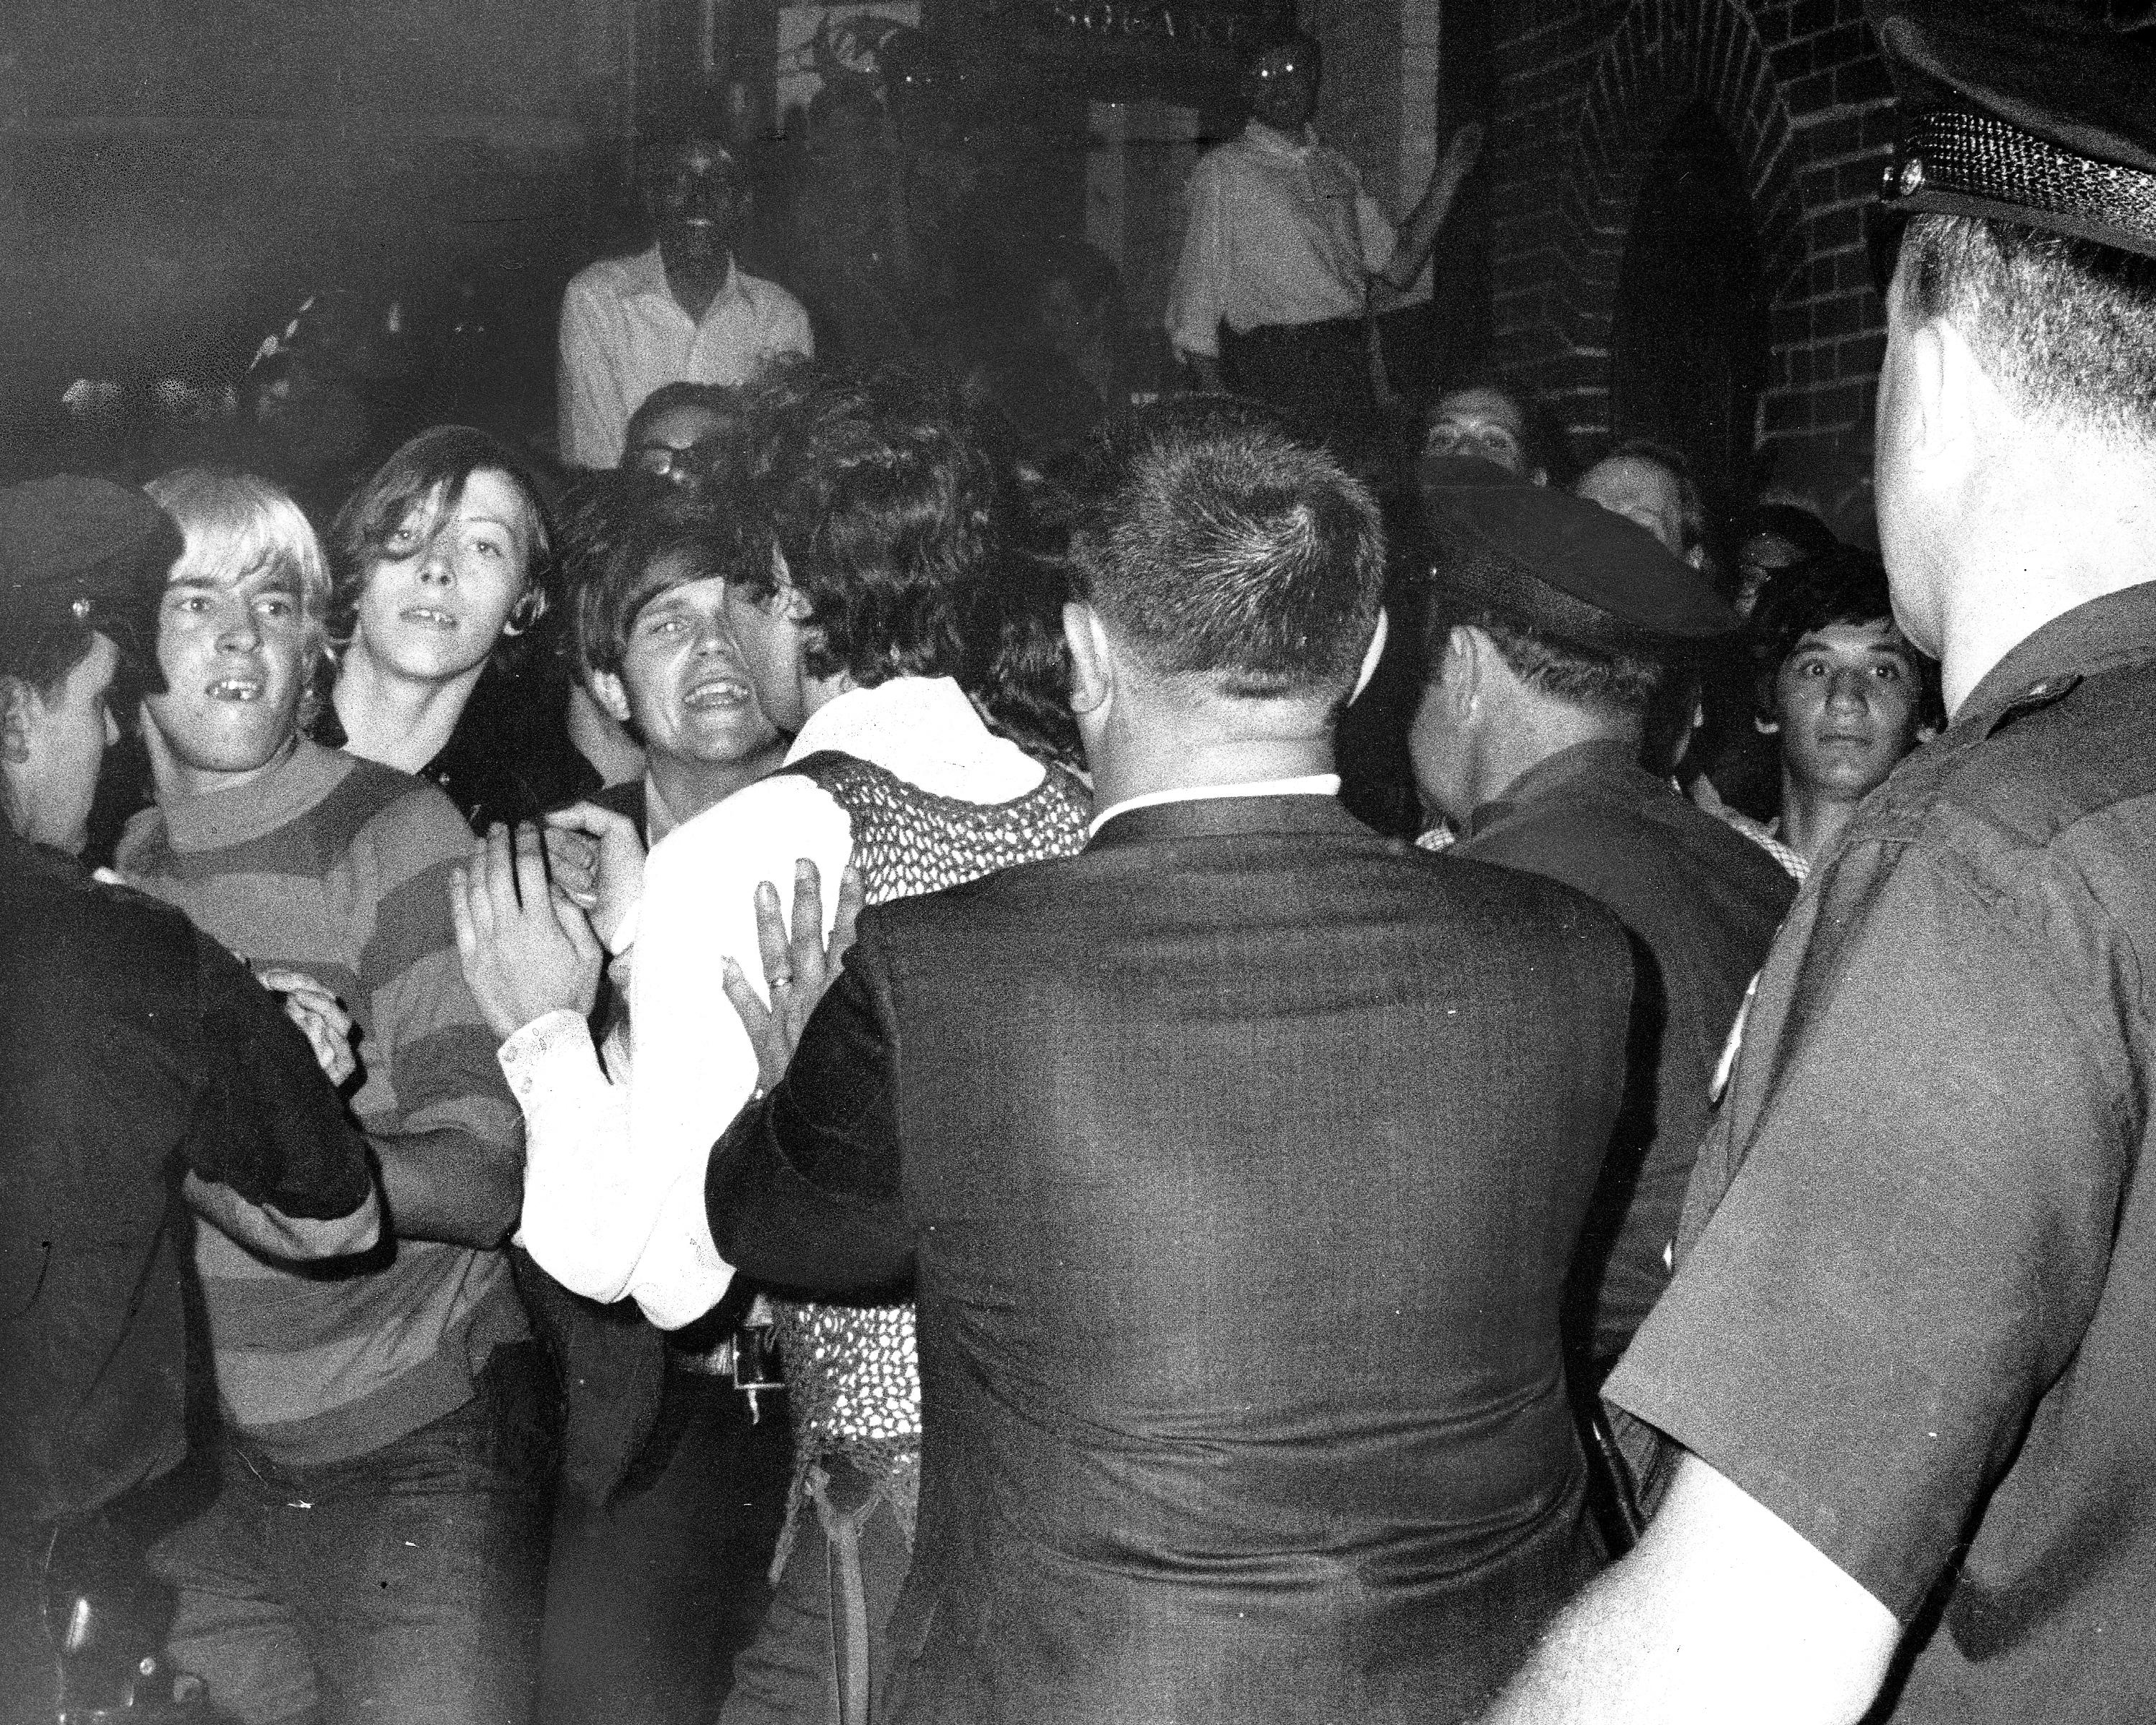 Stonewall Inn nightclub raid. Crowd attempts to impede policUNITED STATES - JUNE 28: Stonewall Inn nightclub raid. Crowd attempts to impede police arrests outside the Stonewall Inn on Christopher Street in Greenwich Village. (Photo by NY Daily News Archive via Getty Images) [Getty Images - NY Daily News Archive]